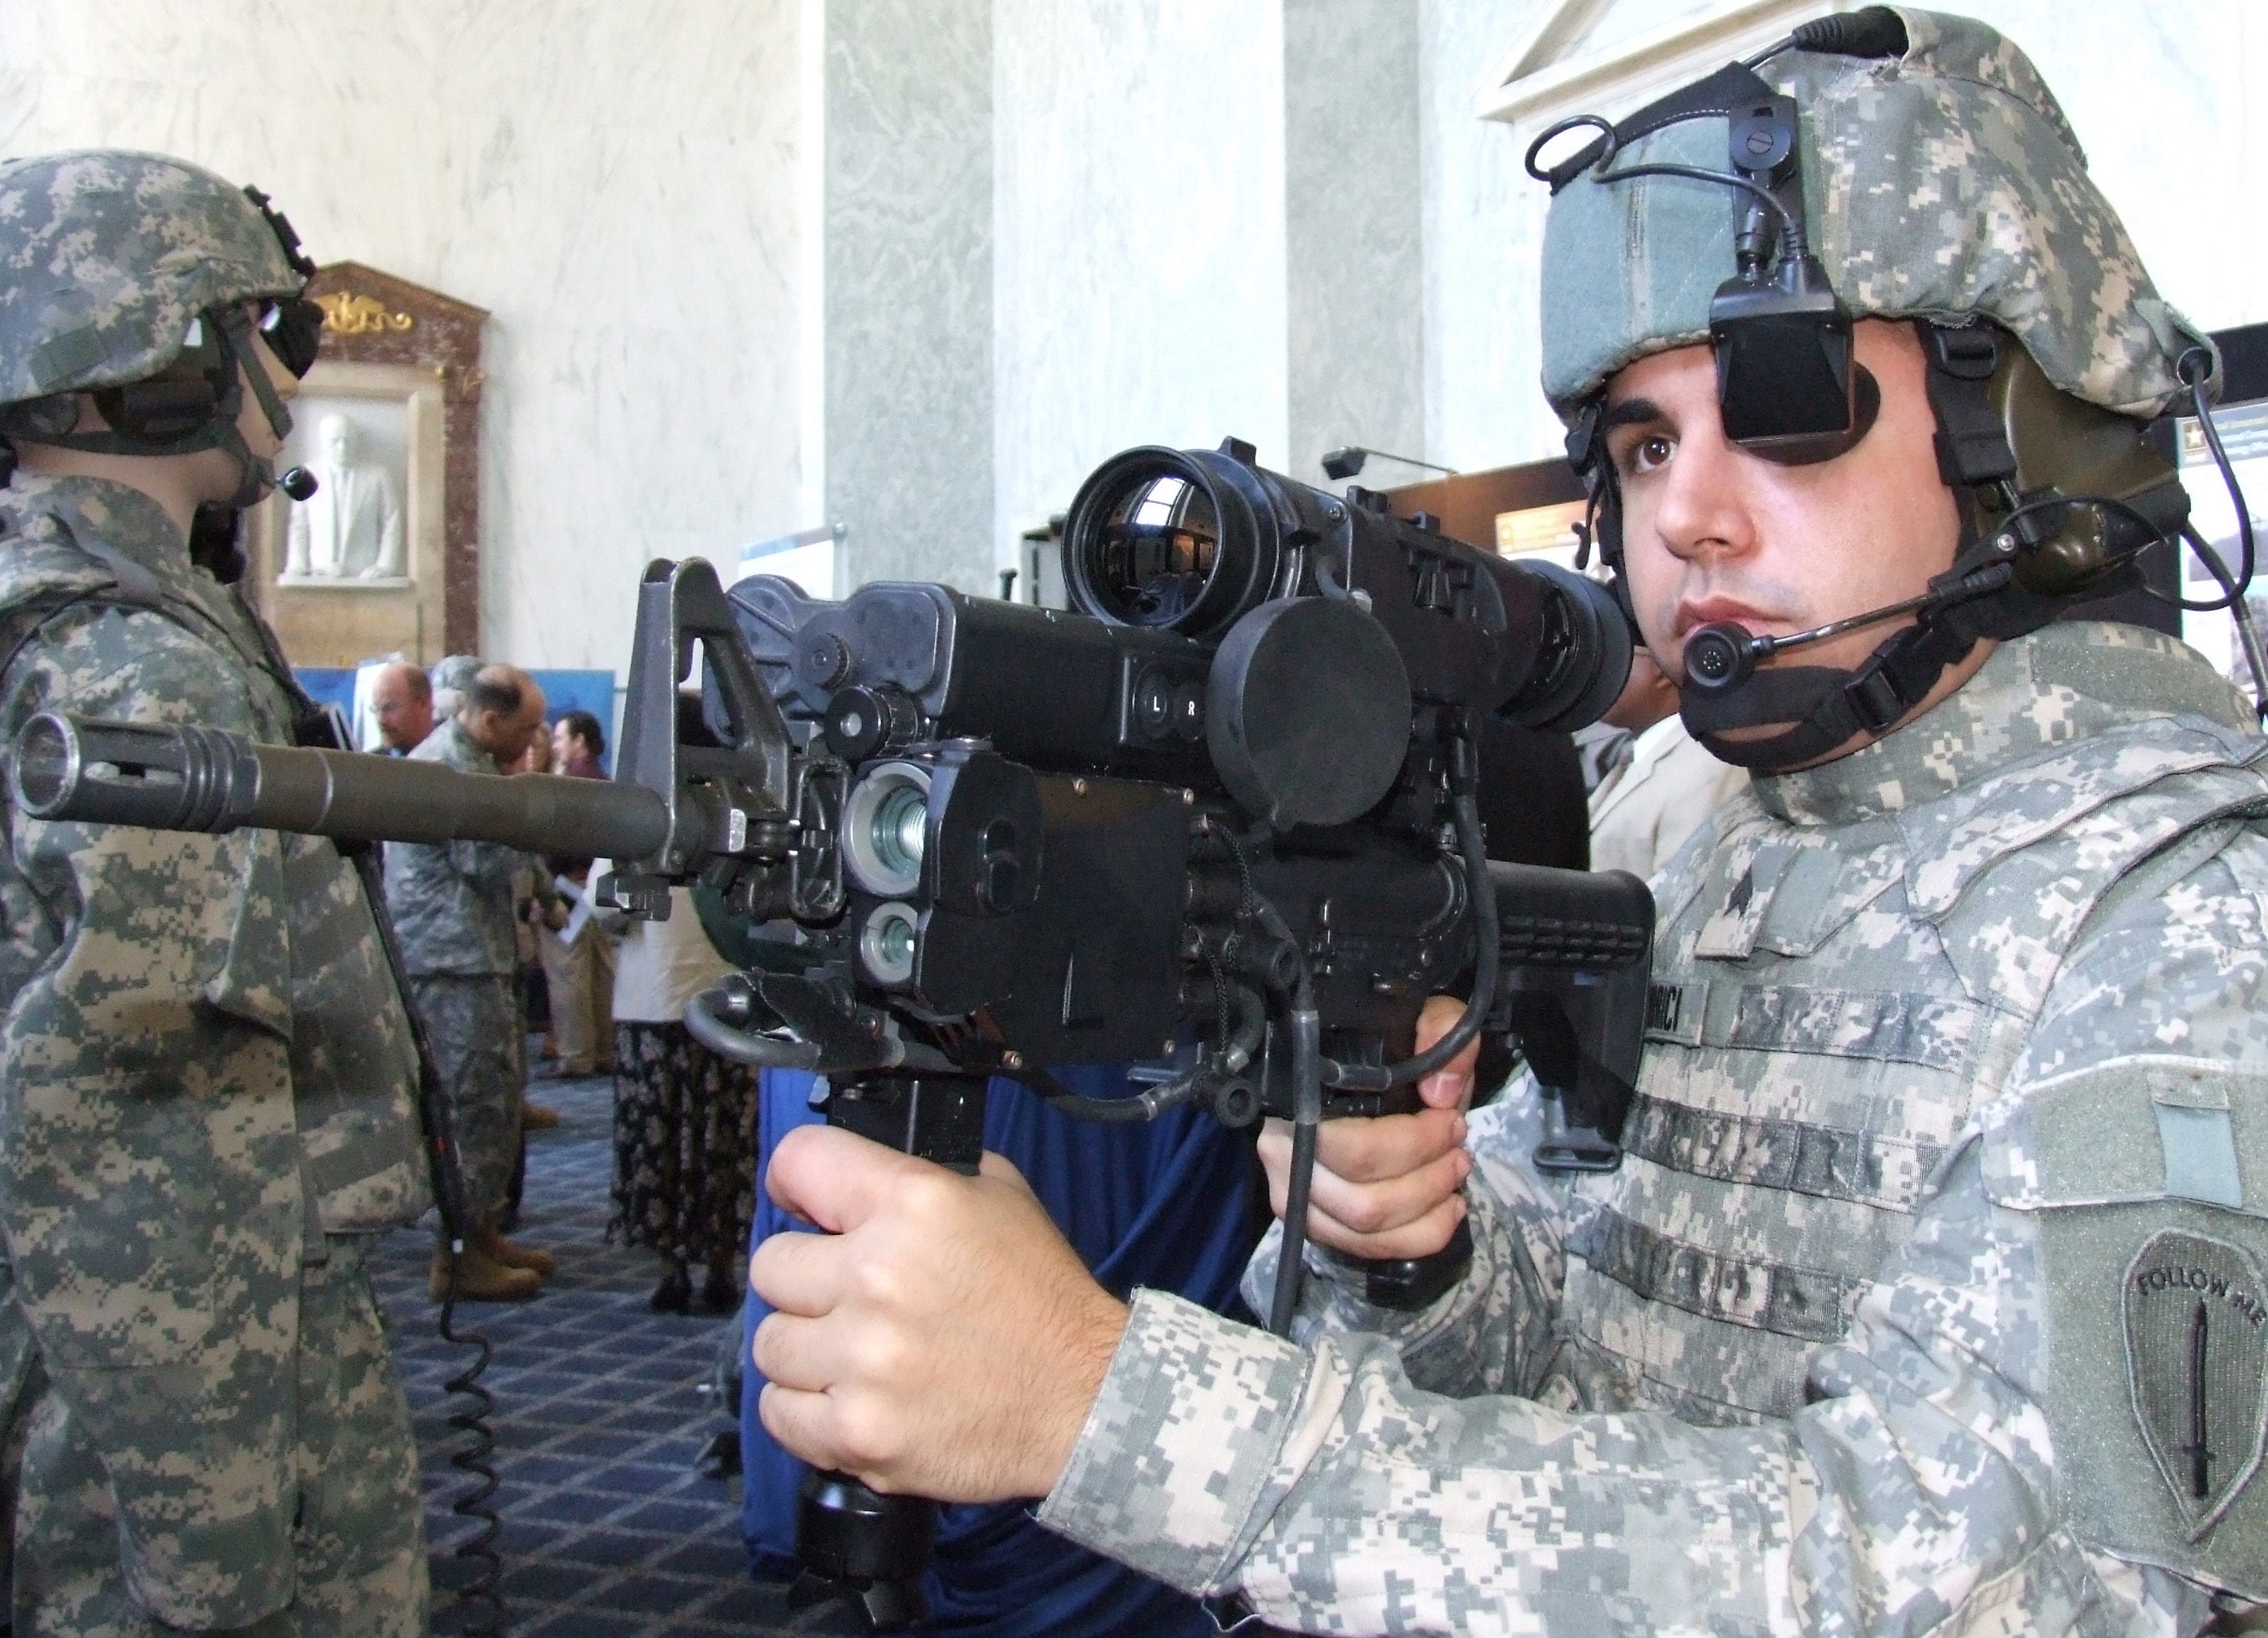 optronics being employed by soldiers